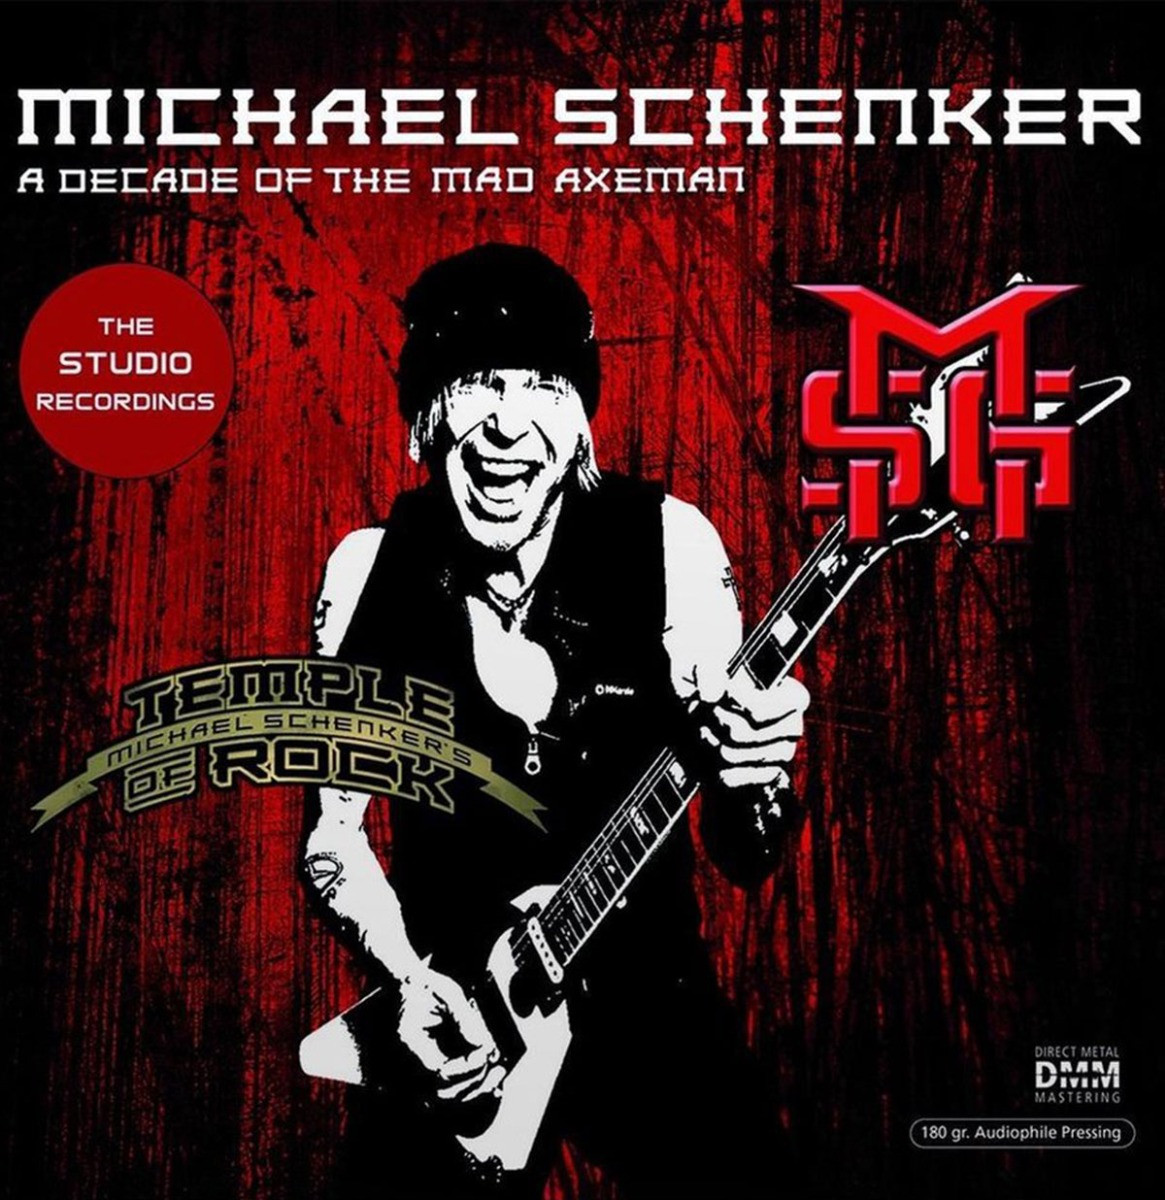 Michael Schenker - A Decade Of The Mad Axeman (The Studio Recordings) 2LP